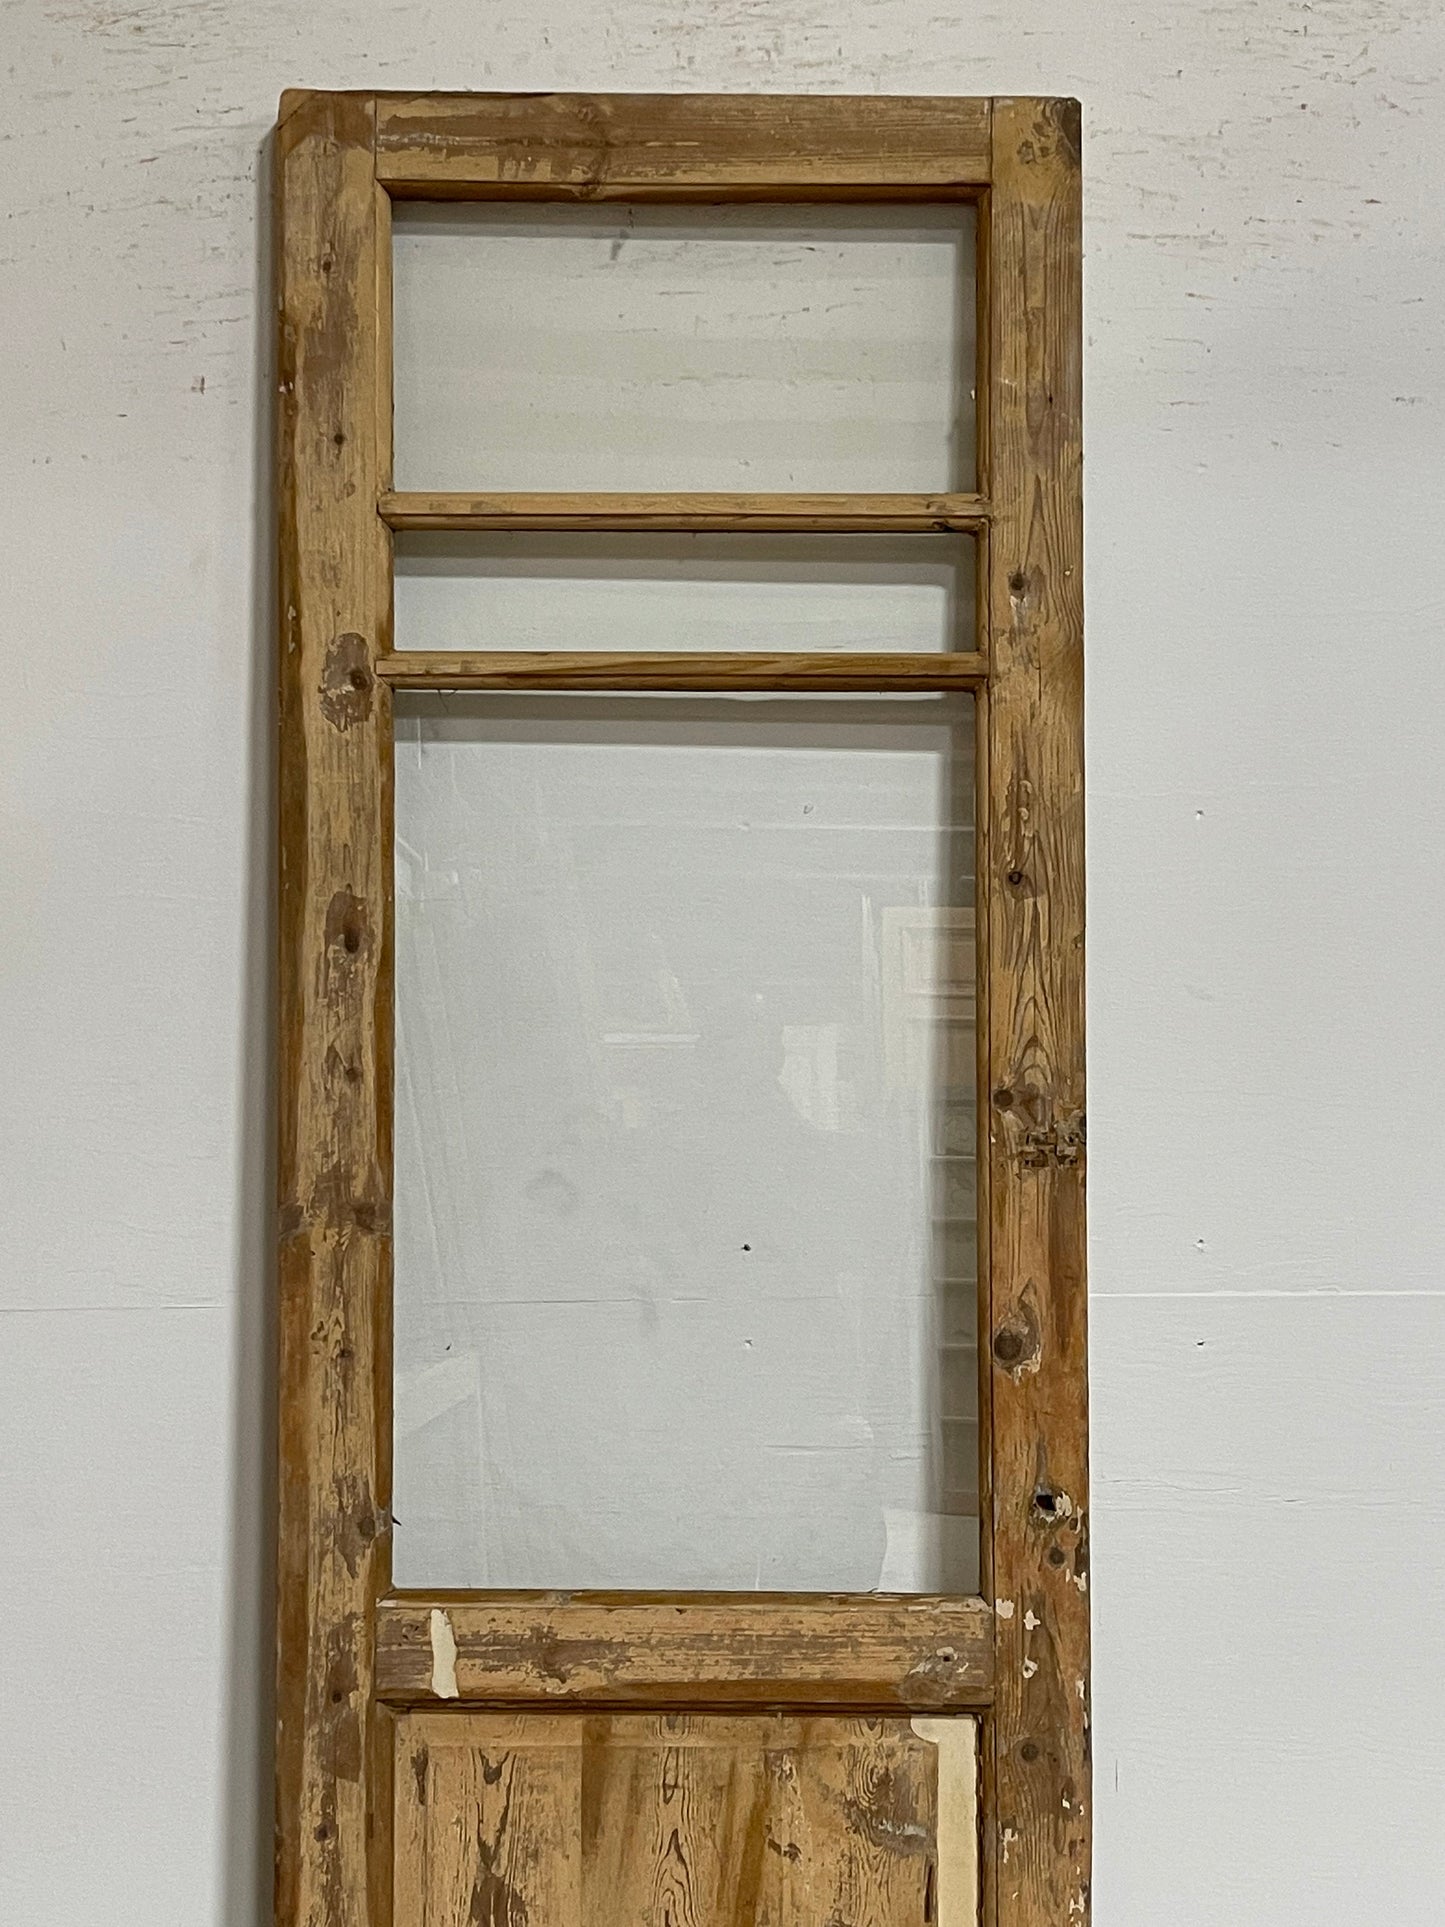 Antique French panel door with glass (89.5x27.5) G1606s